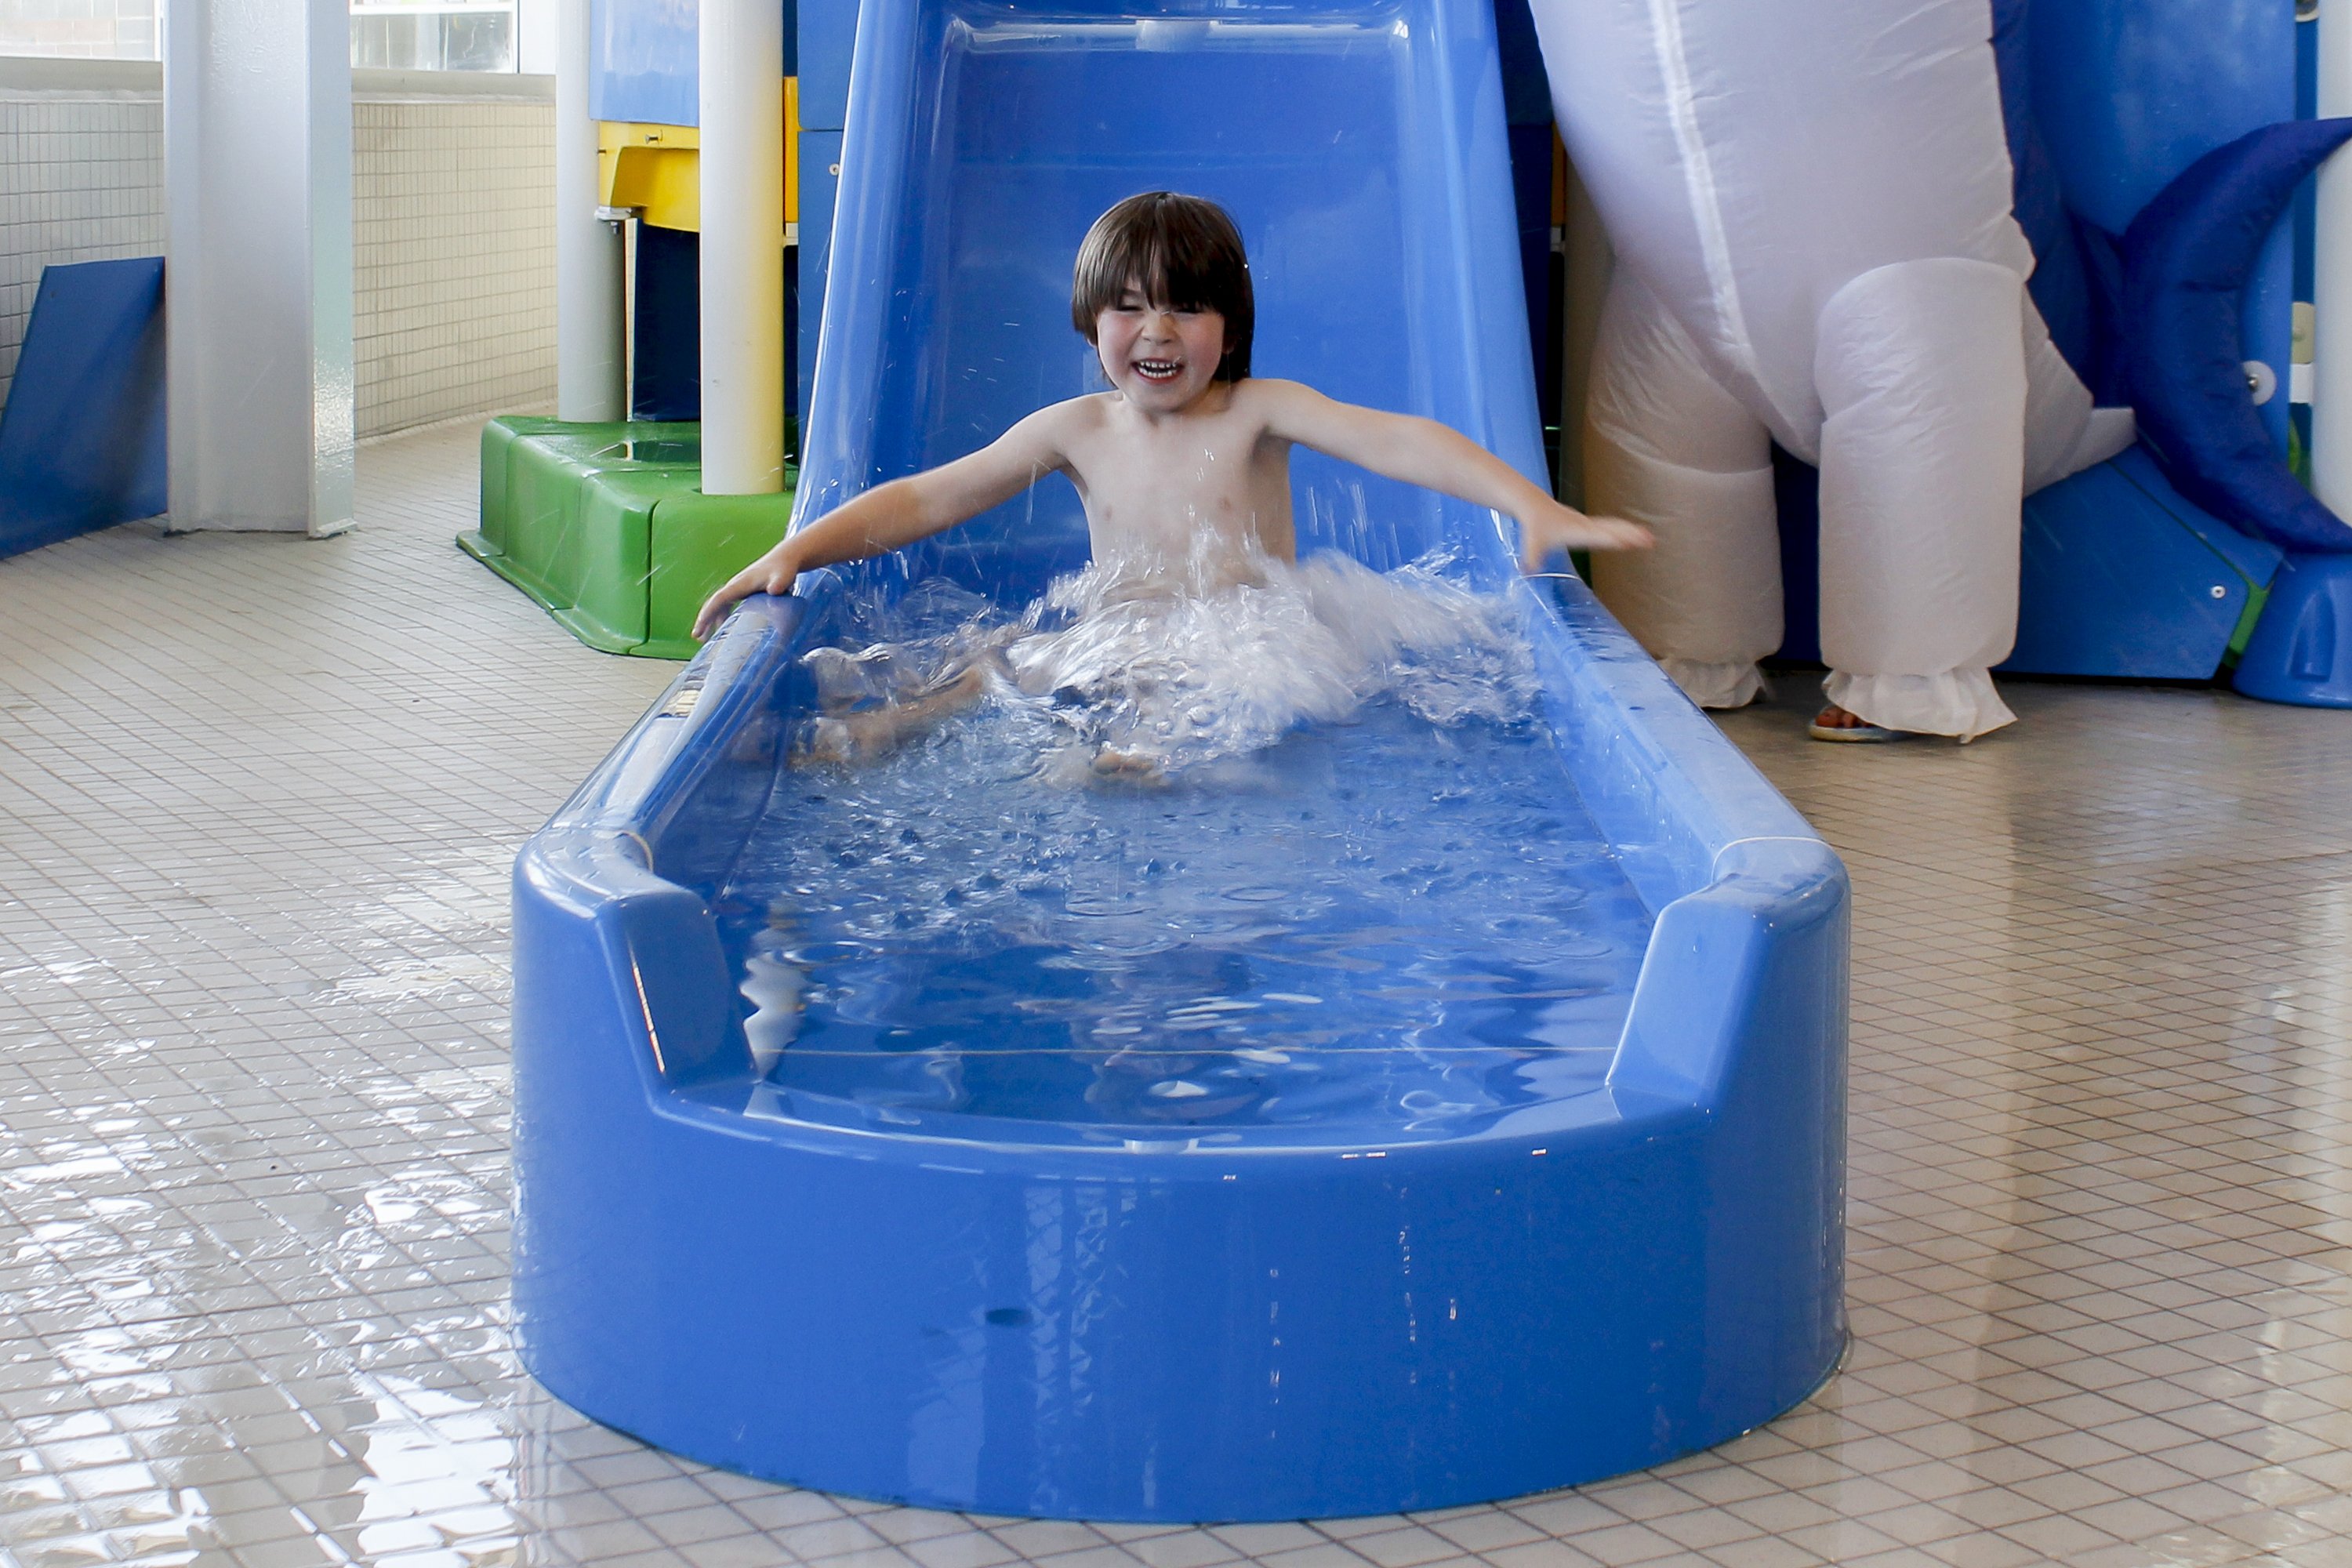 A child splashes down a water slide